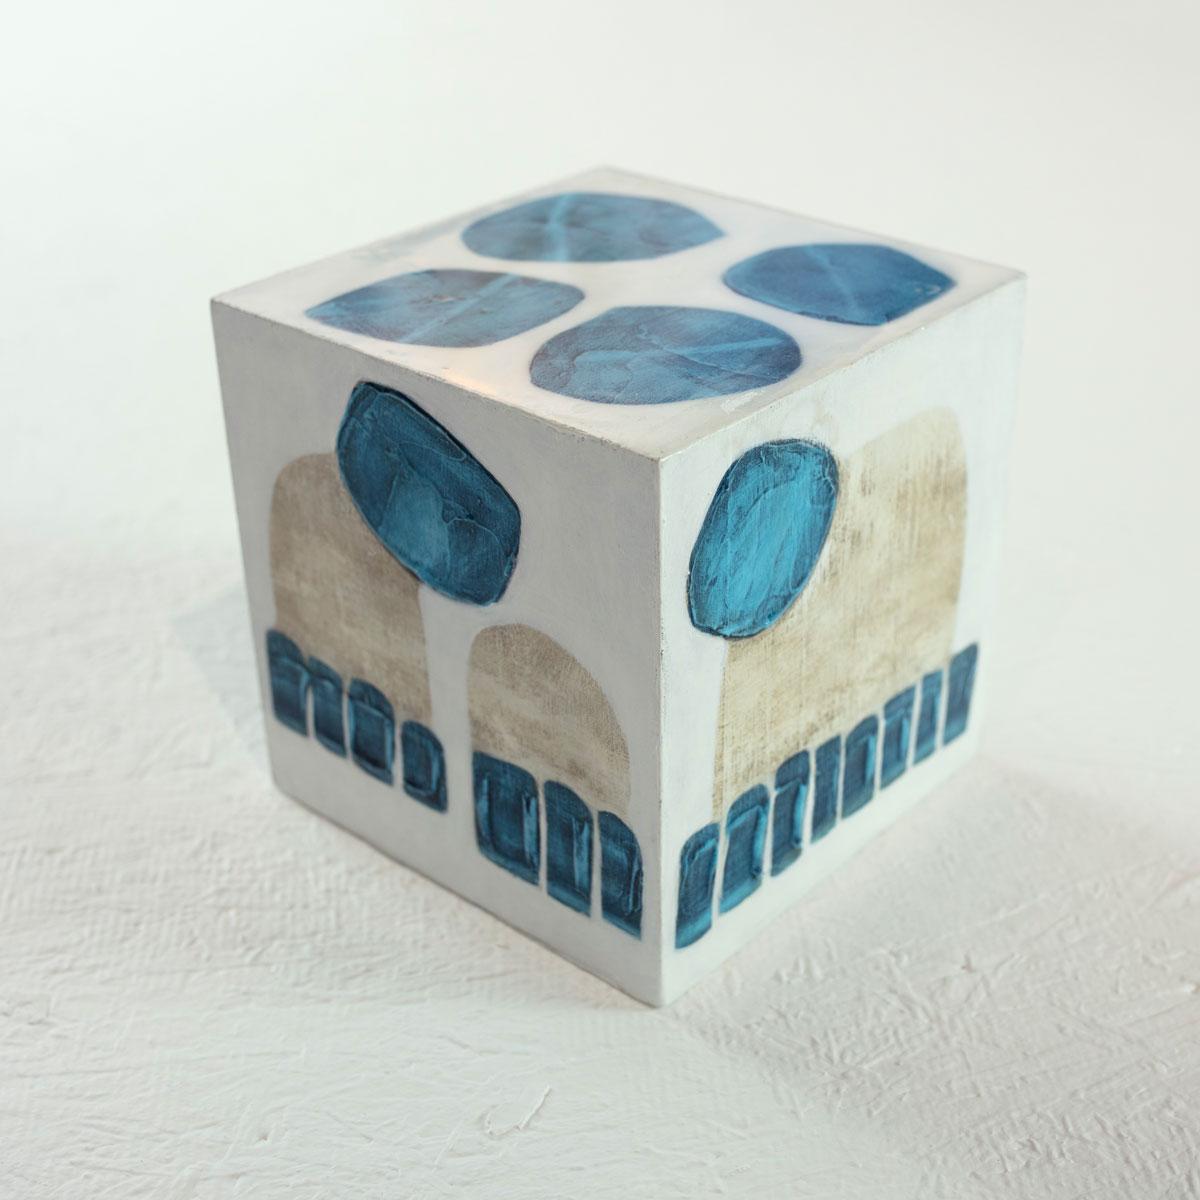 Sofie Swann Abstract Painting - "Little Swann 7" Painted Wooden Cube Sculpture 